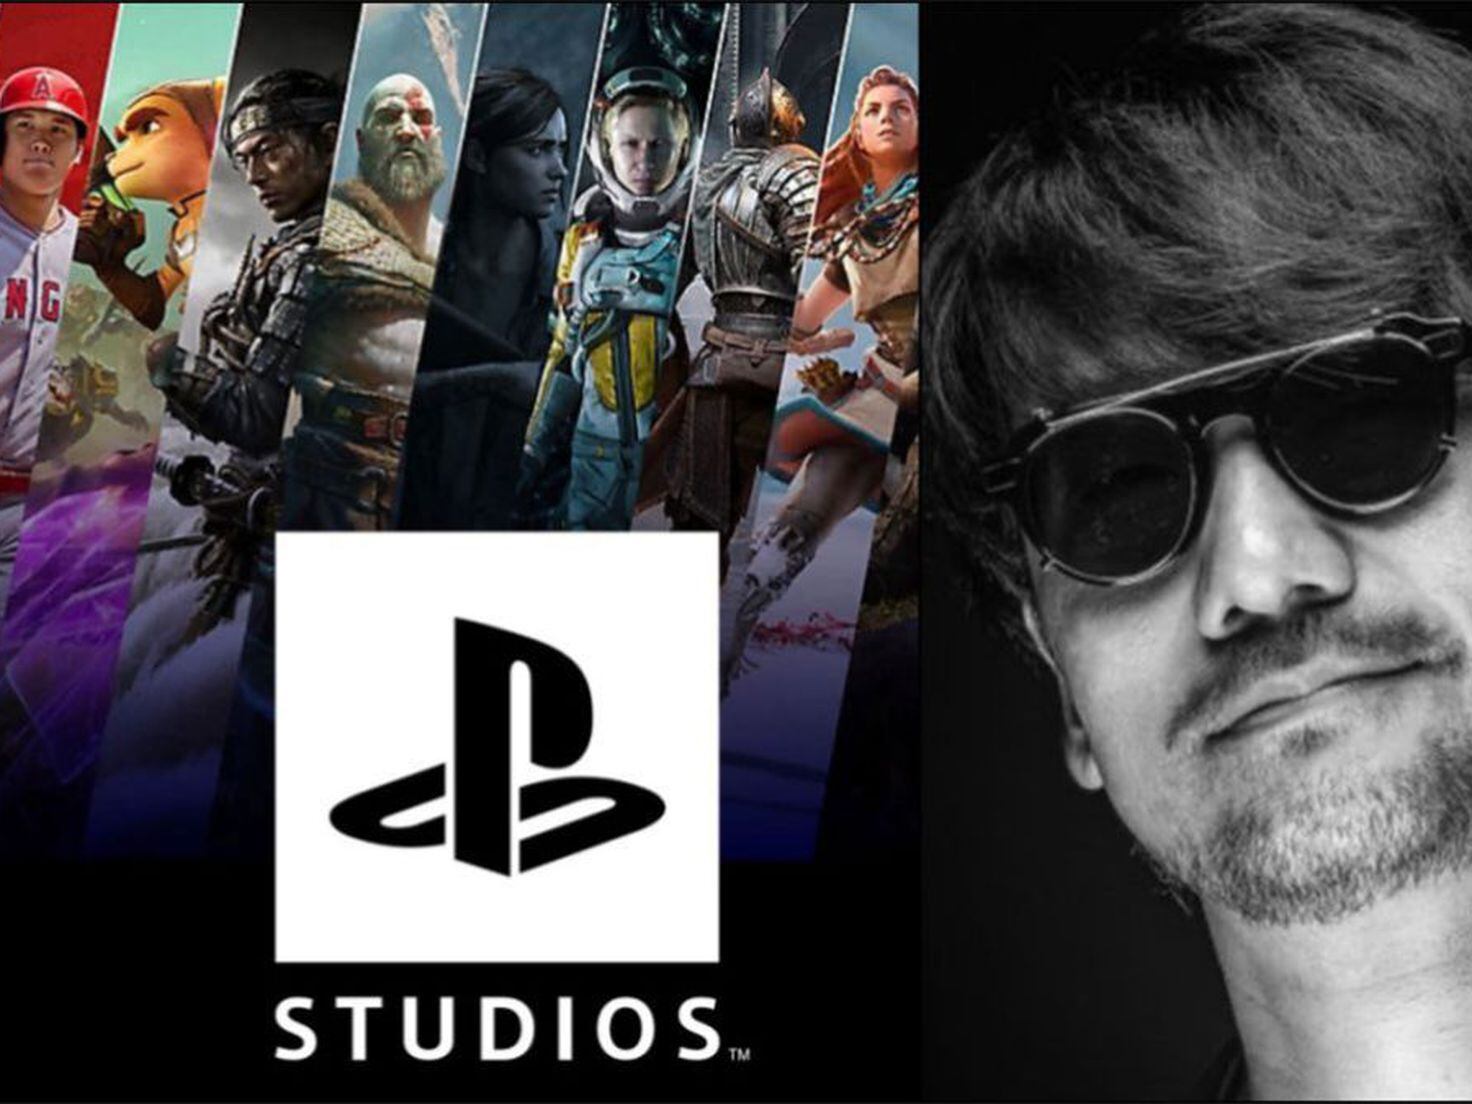 Hideo Kojima: VR Will 'Significantly Change' Entertainment